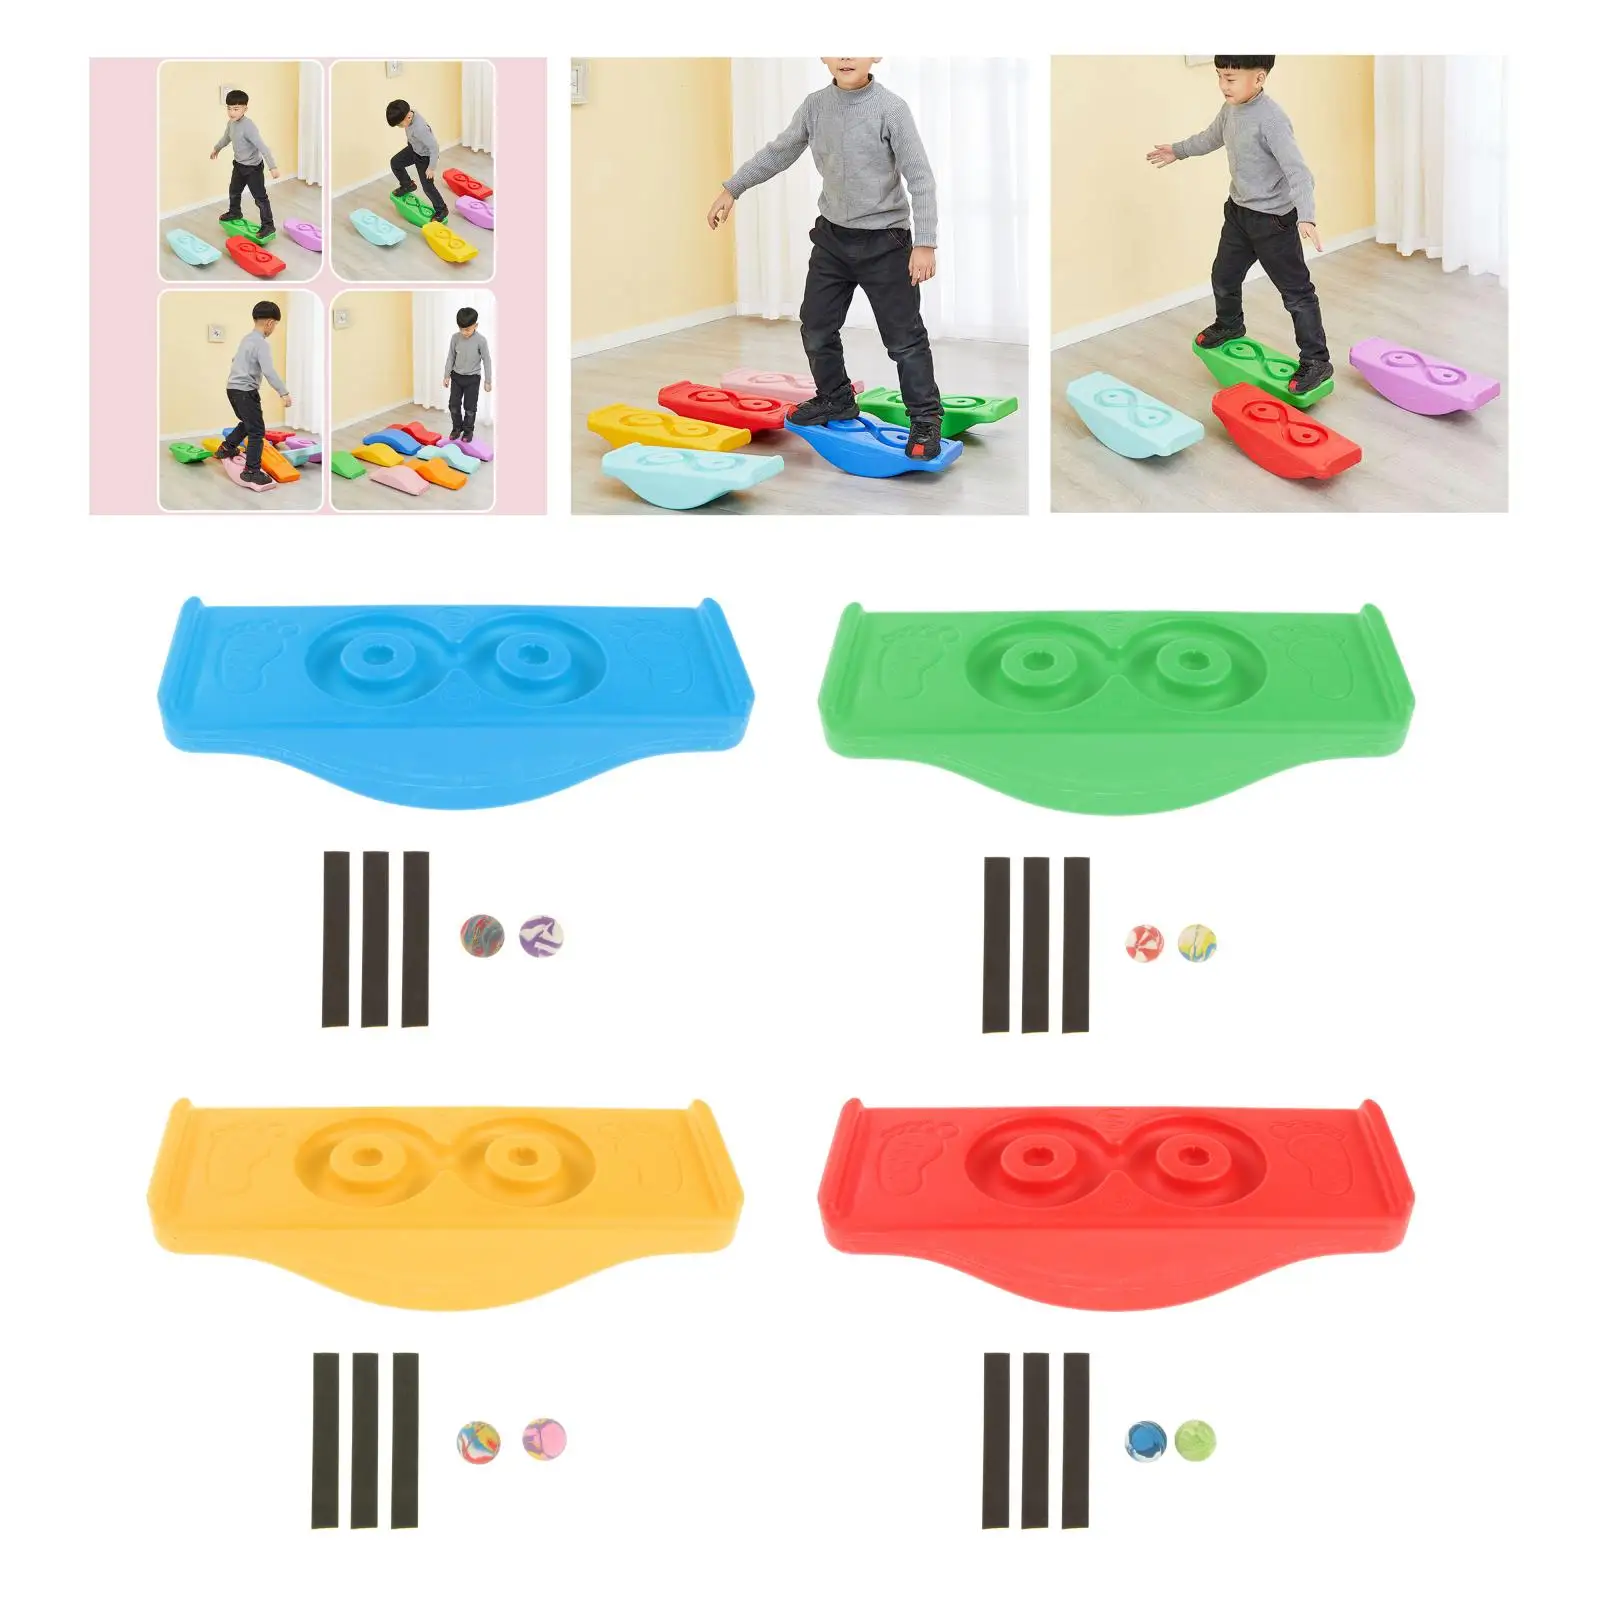 Wobbly Balance Board Sports Outside Children Kids Exercise Indoor Outdoor Seesaw Toy